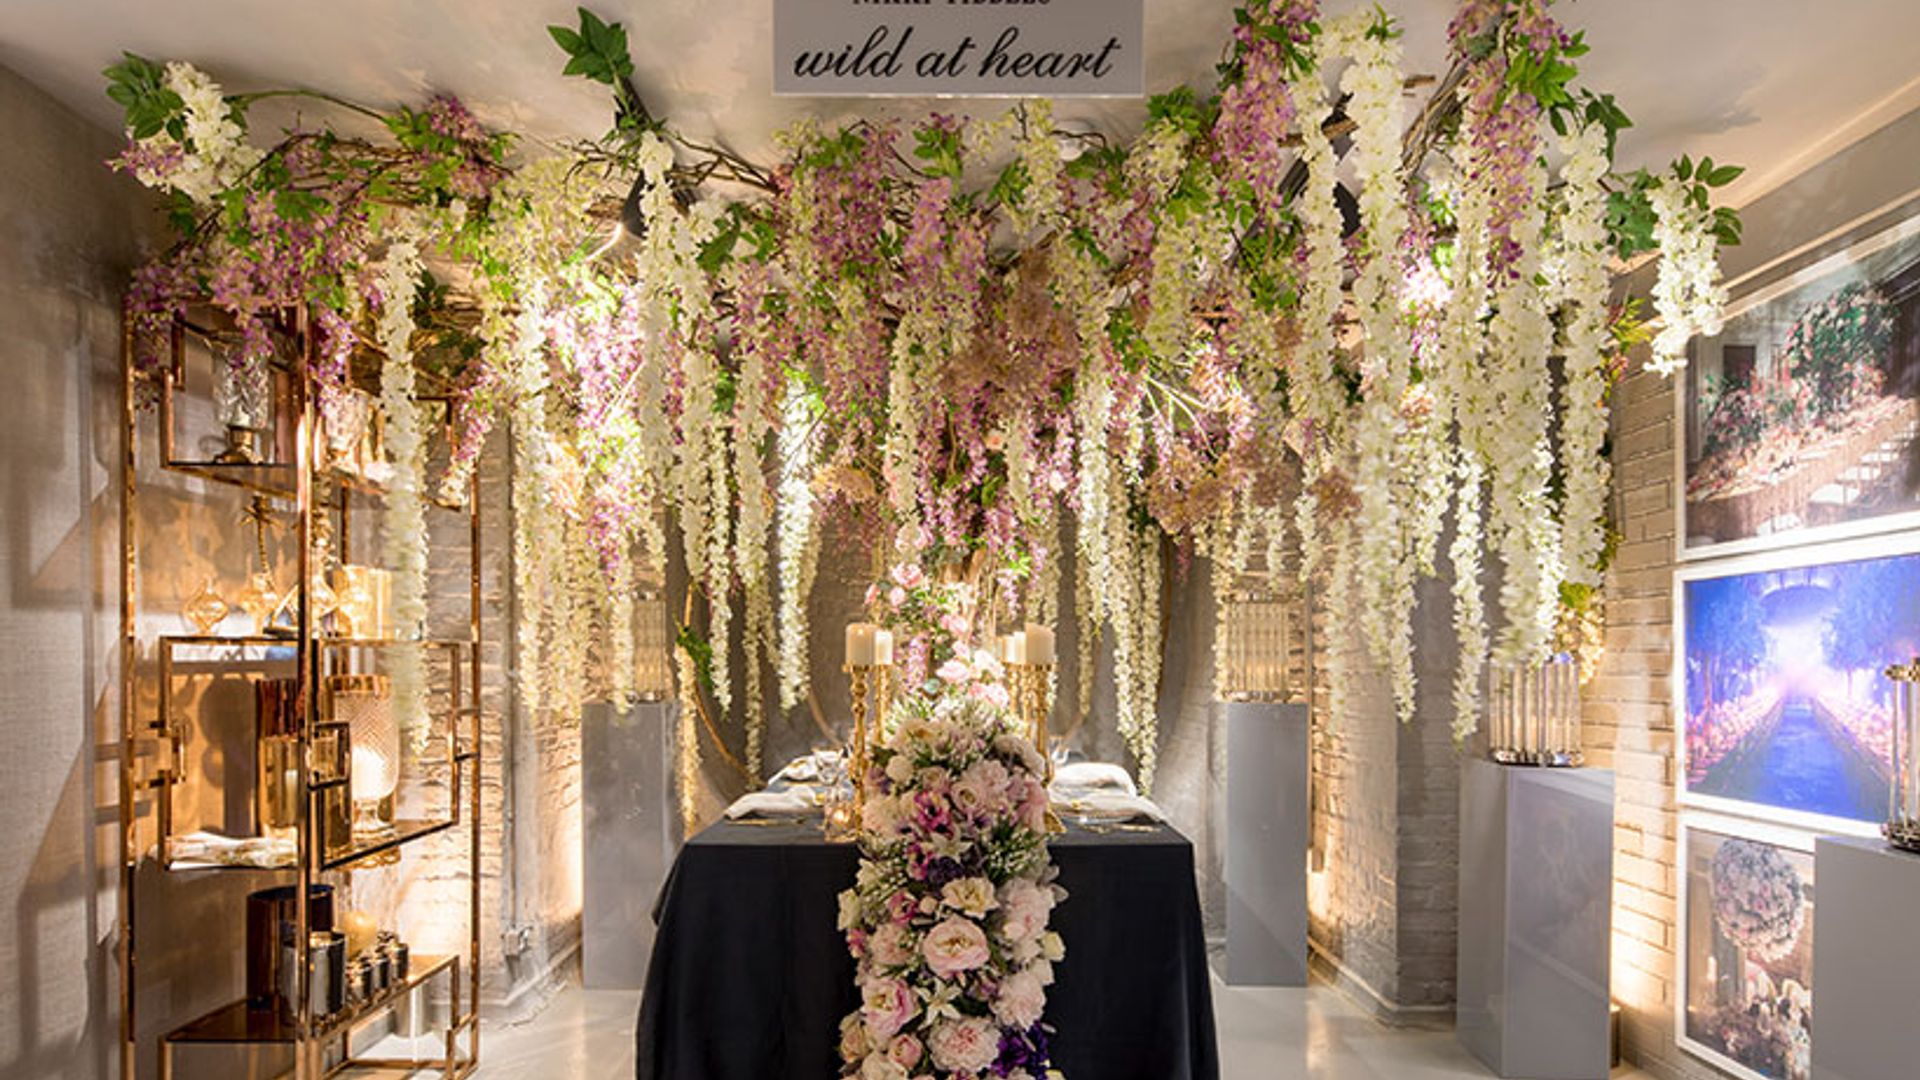 Listen up brides-to-be! The world's first wedding department store has opened in London